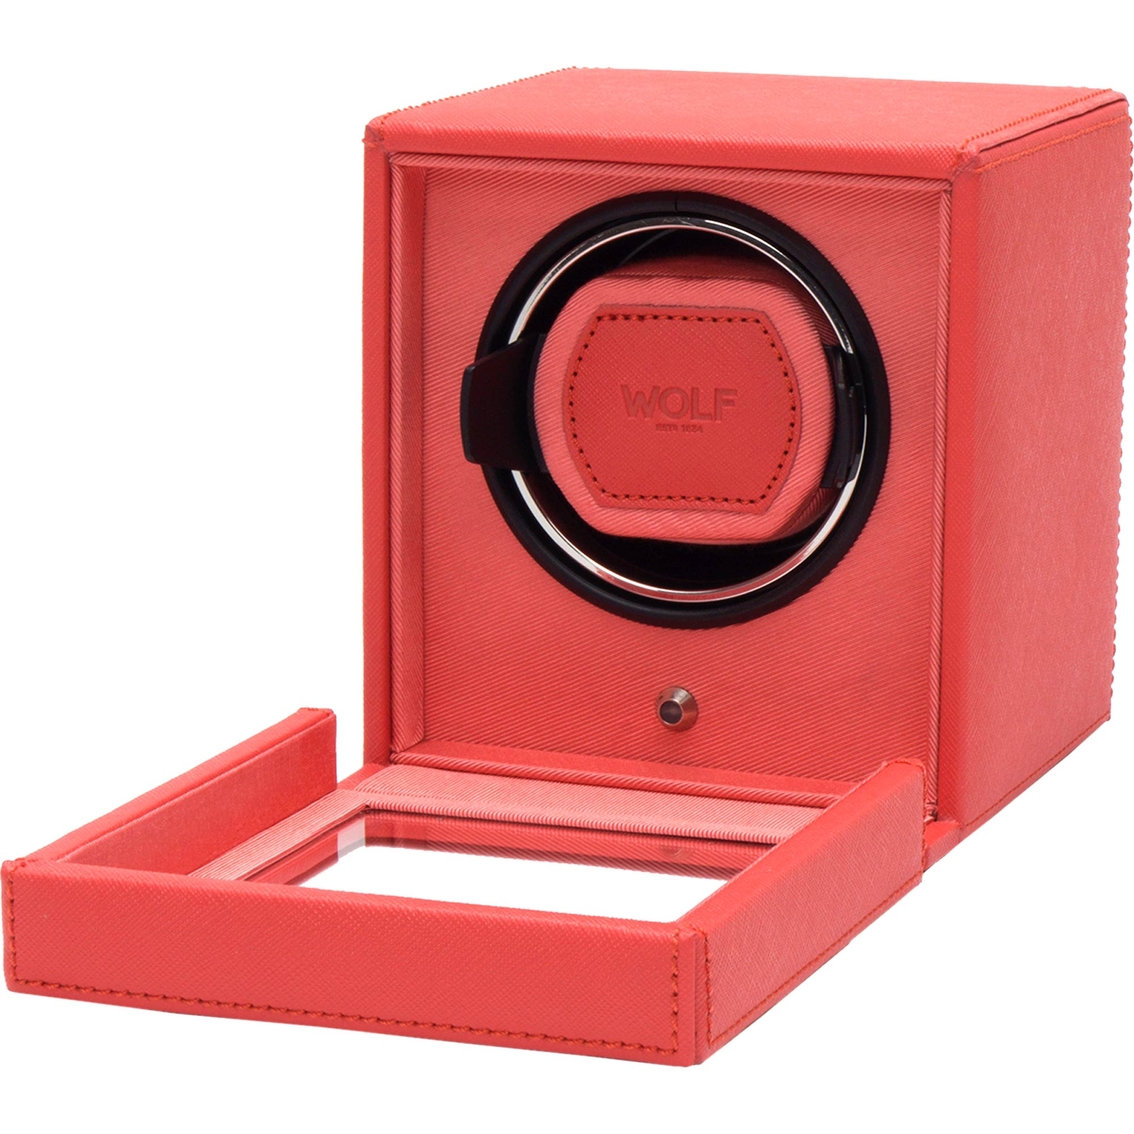 WOLF Cub Watch Winder With Cover - Image 3 of 4